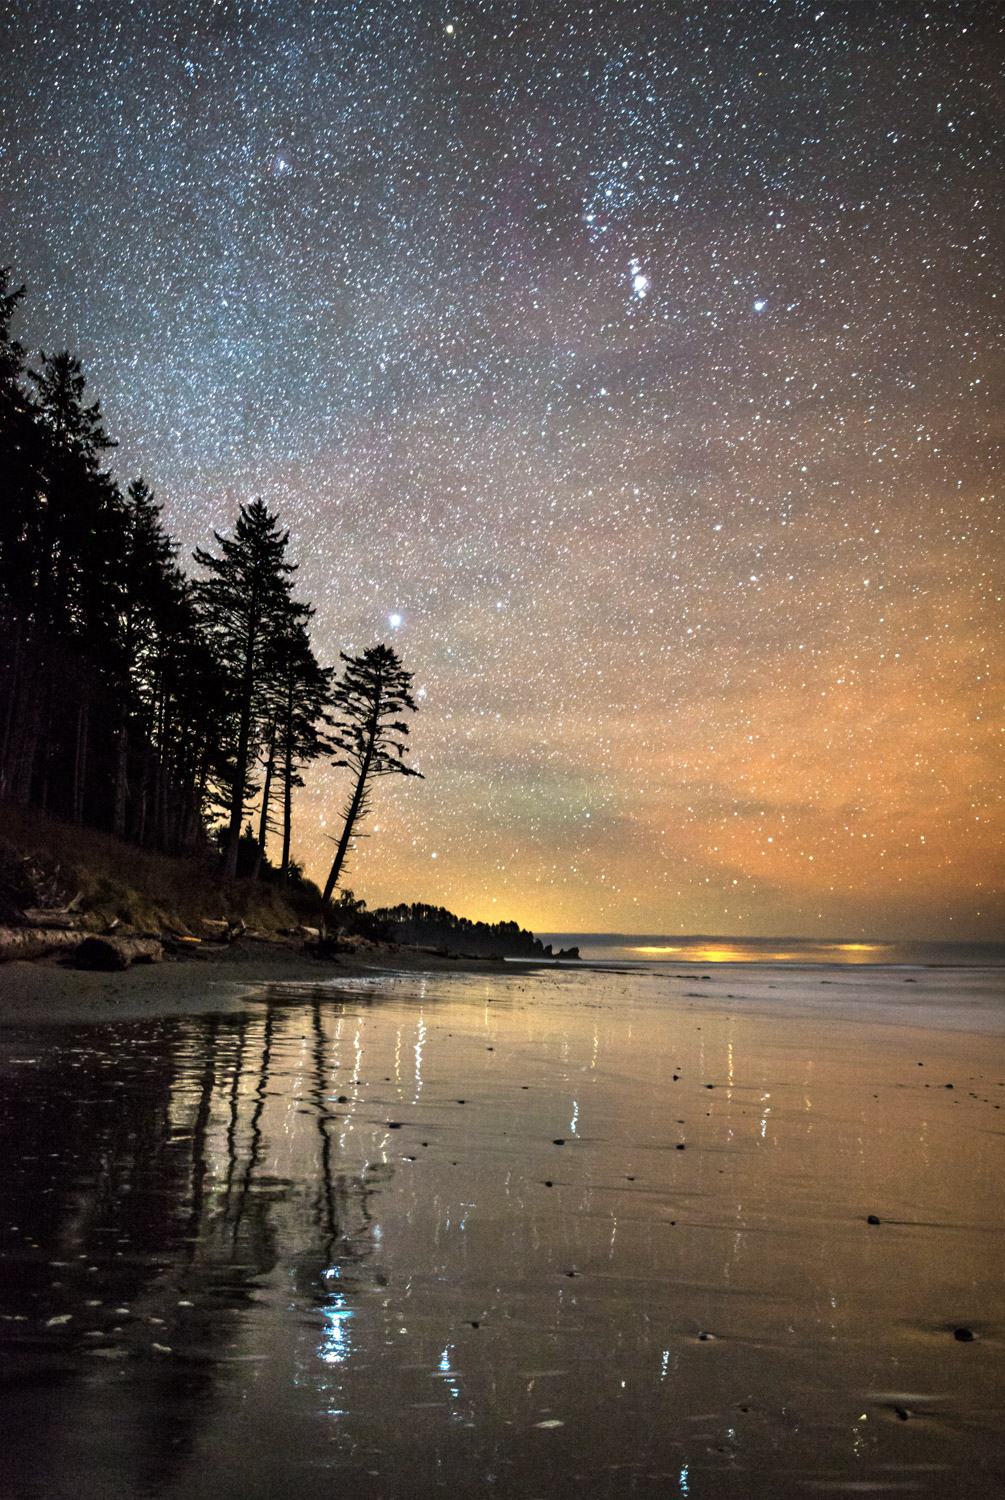 Starry skies and starry reflections at Second Beach in LaPush, Washington.